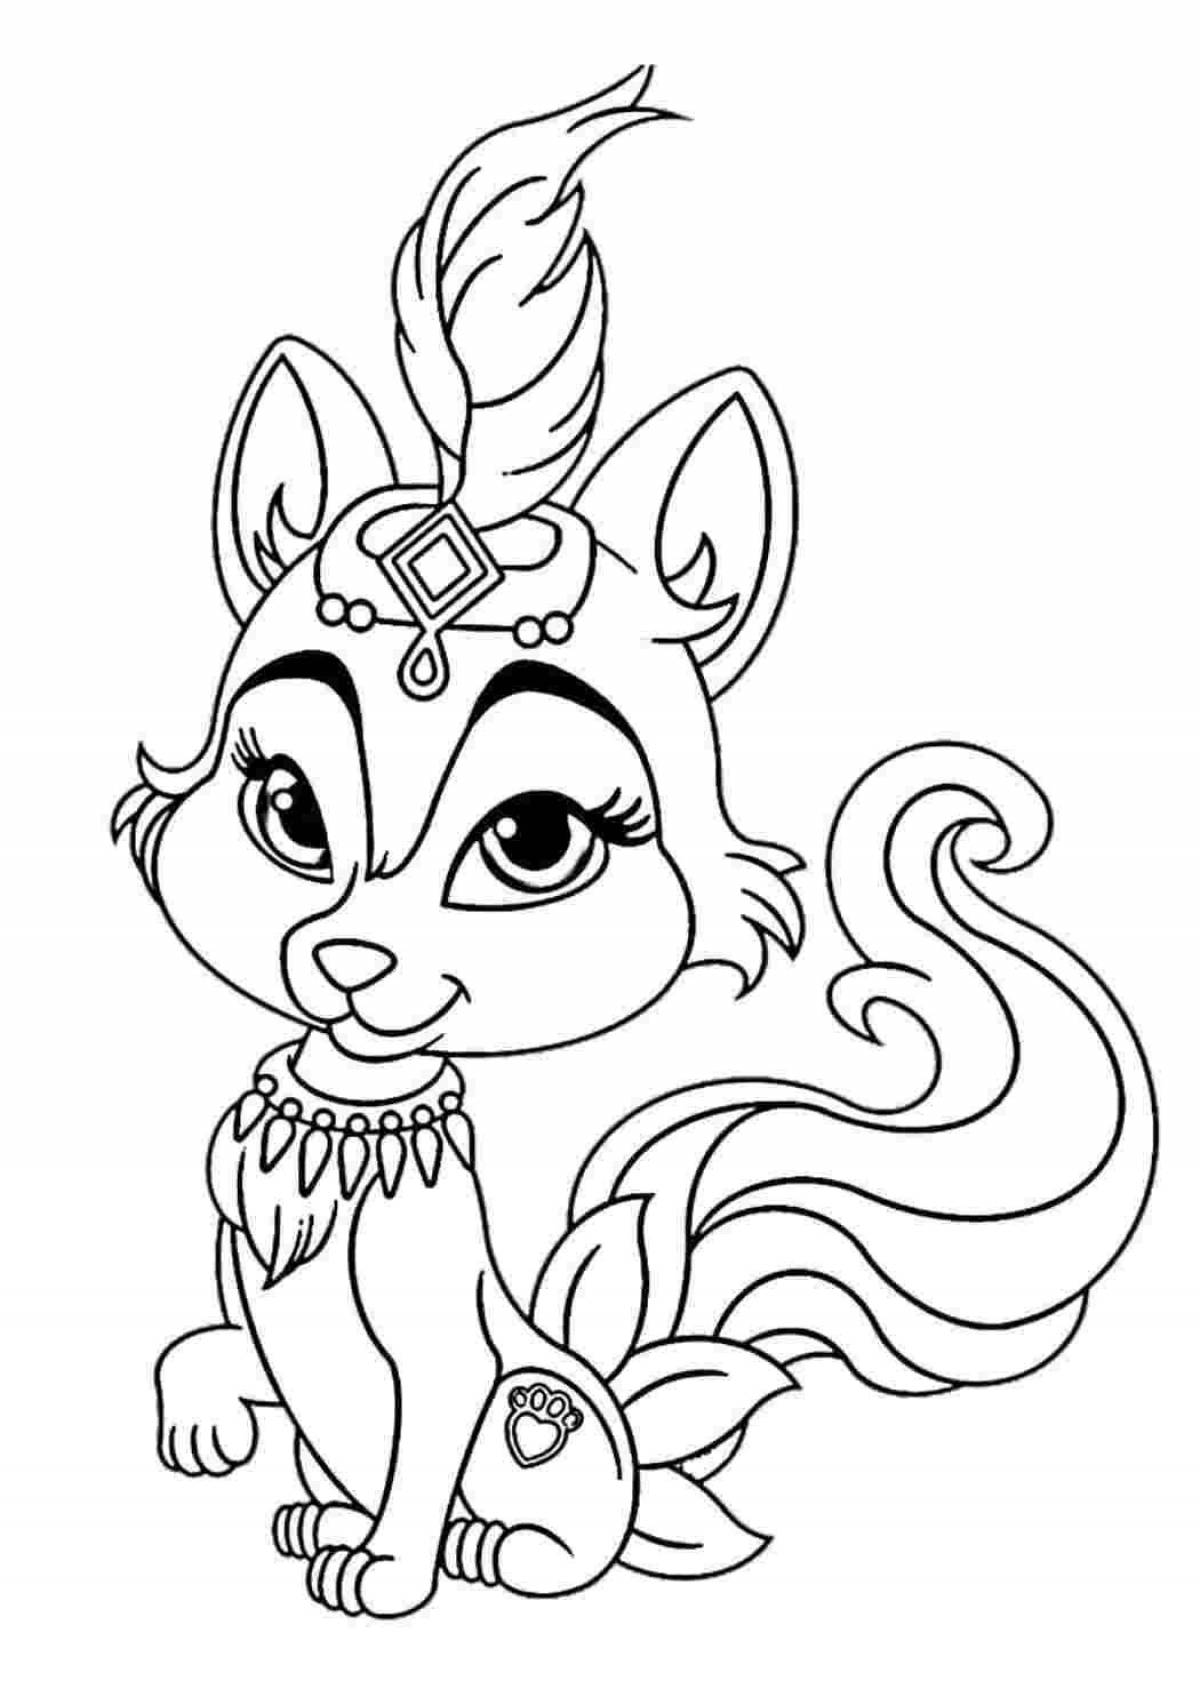 Crazy furry friends coloring page